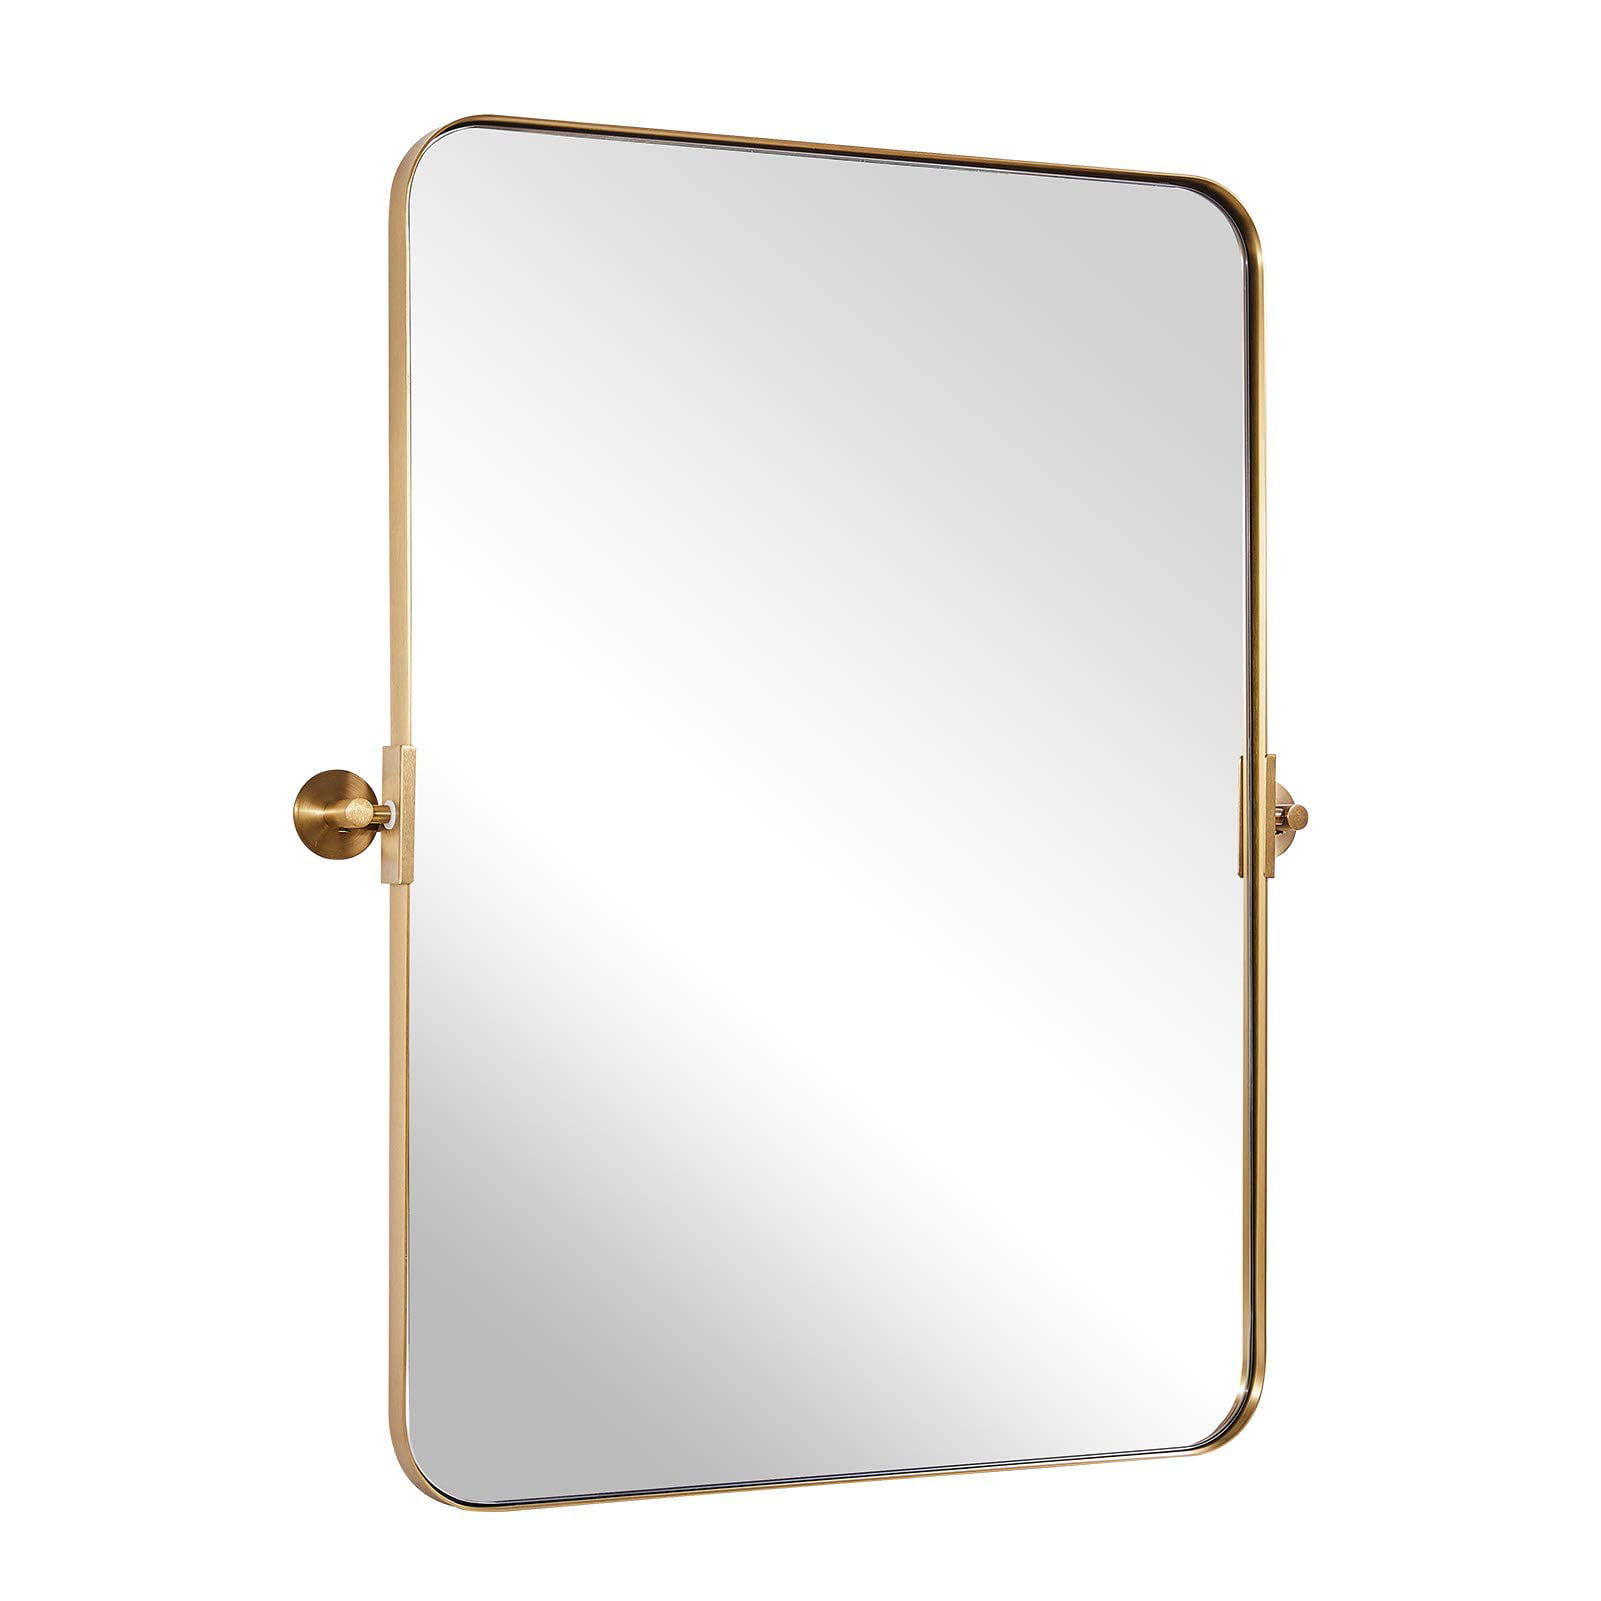 MOON MIRROR 24"x36" Brushed Gold Stainless Steel Framed Pivot Rectangle Bathroom  Mirror for Wall Mounted, Tilting Rounded Corner Rectangular Vanity Mirror  Hangs Vertical(Overall 27.75" x 36")